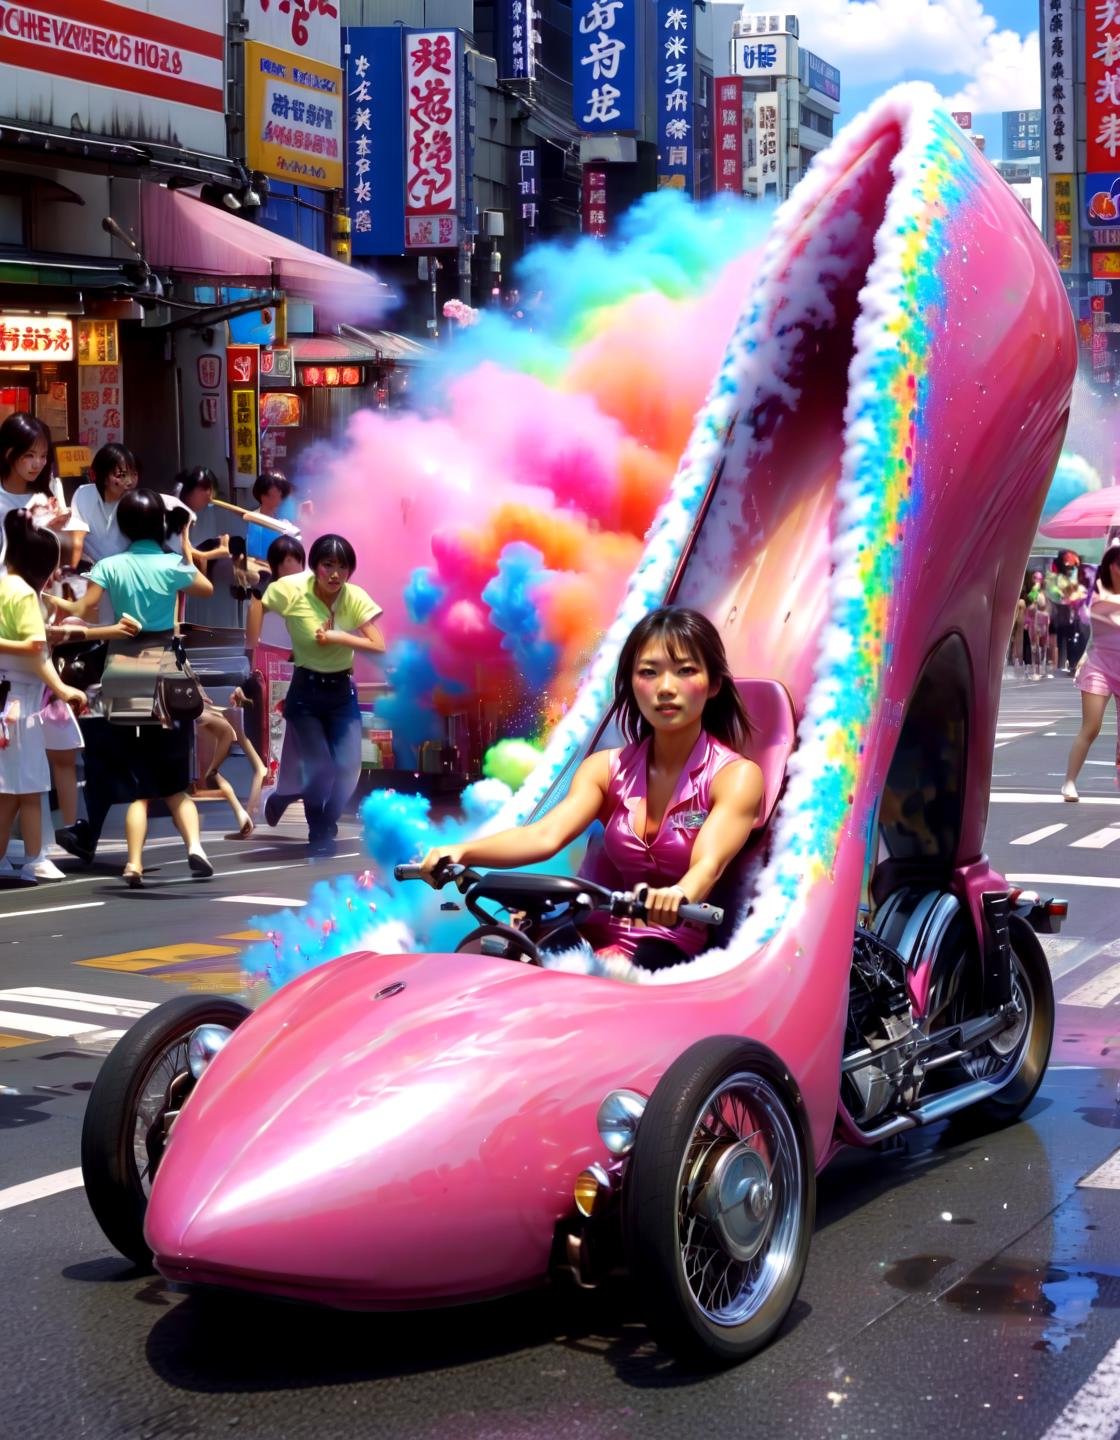 Action Films 1girl driving a hhc,car, in tokio, masterpice, 8k, candy cotton clouds, glitterbomb,,, Action Films, often for intense sequences, heroic characters, or adrenaline-fueled excitement.